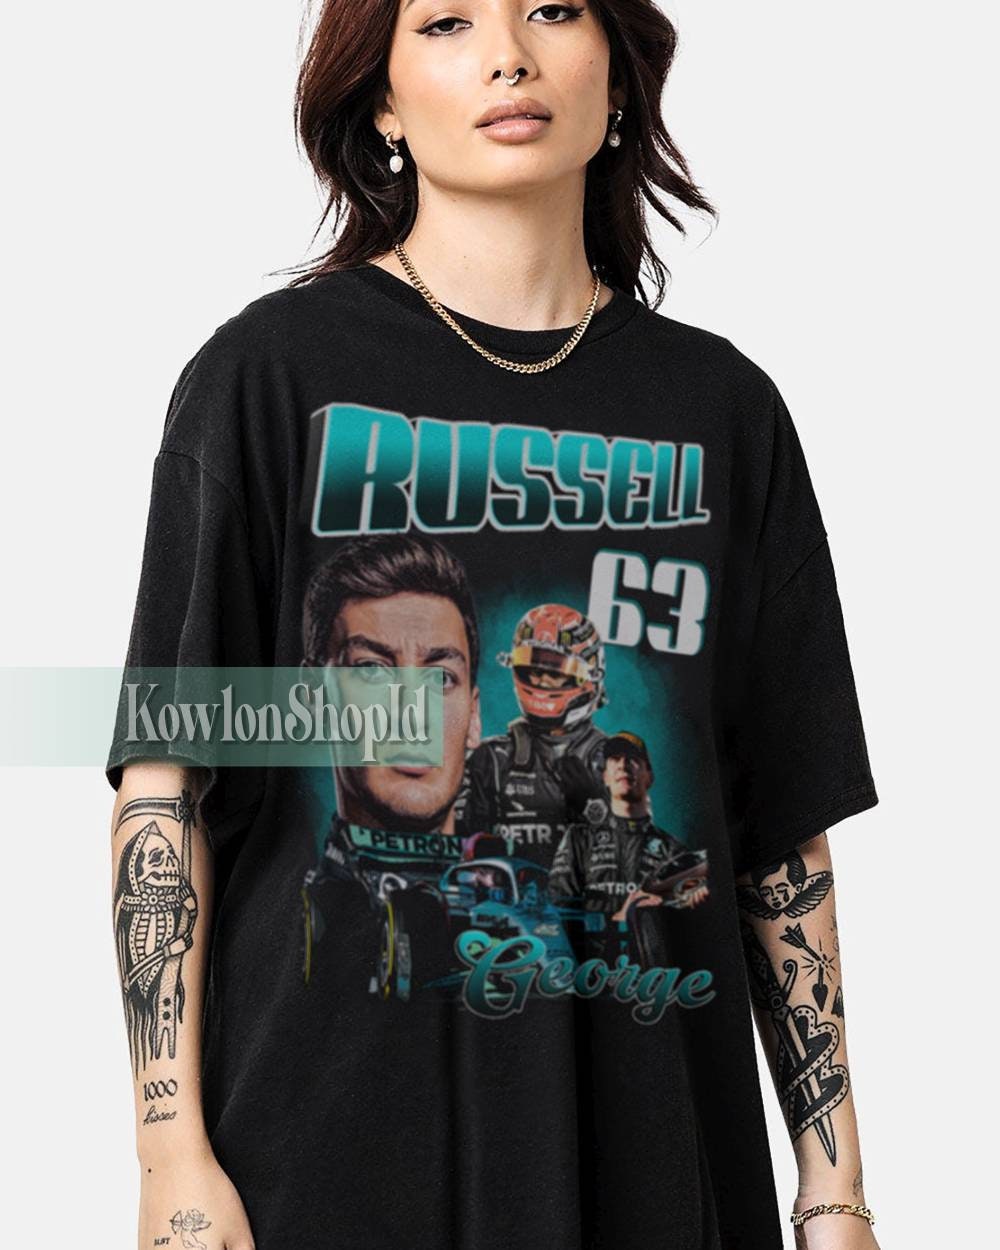 Discover Limited George Russel World Championship  Vintage Shirt